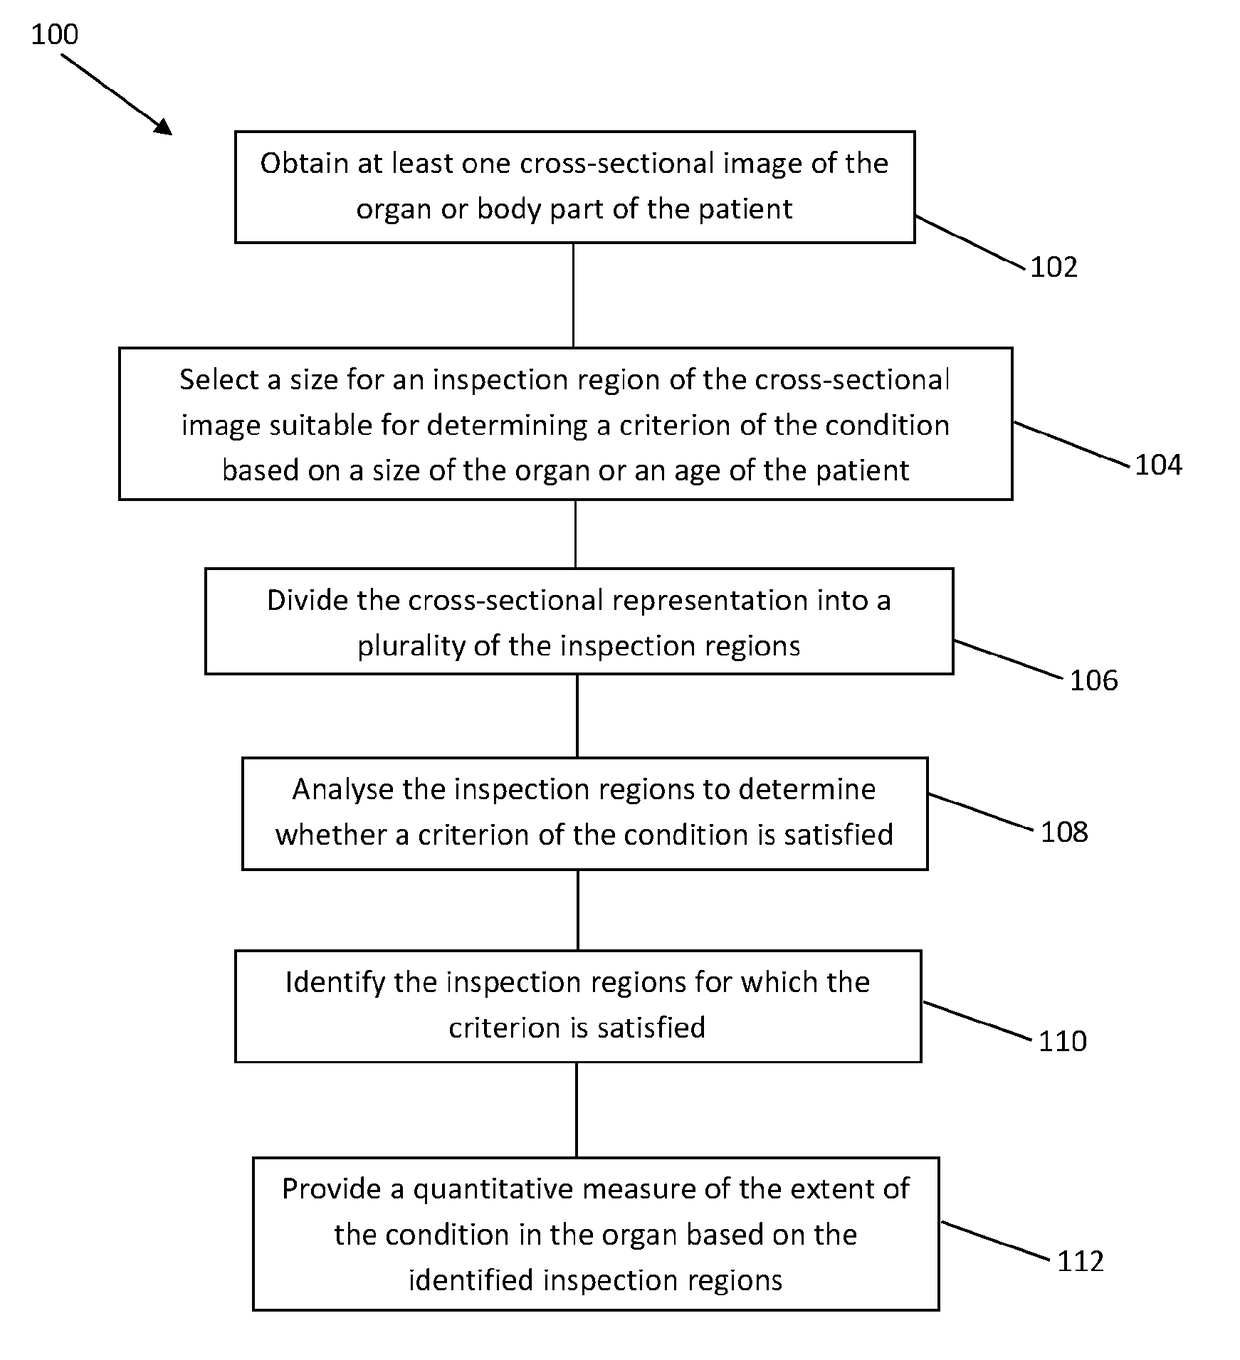 A Method of Analysing an Image for Assessing a Condition of an Organ of a Patient